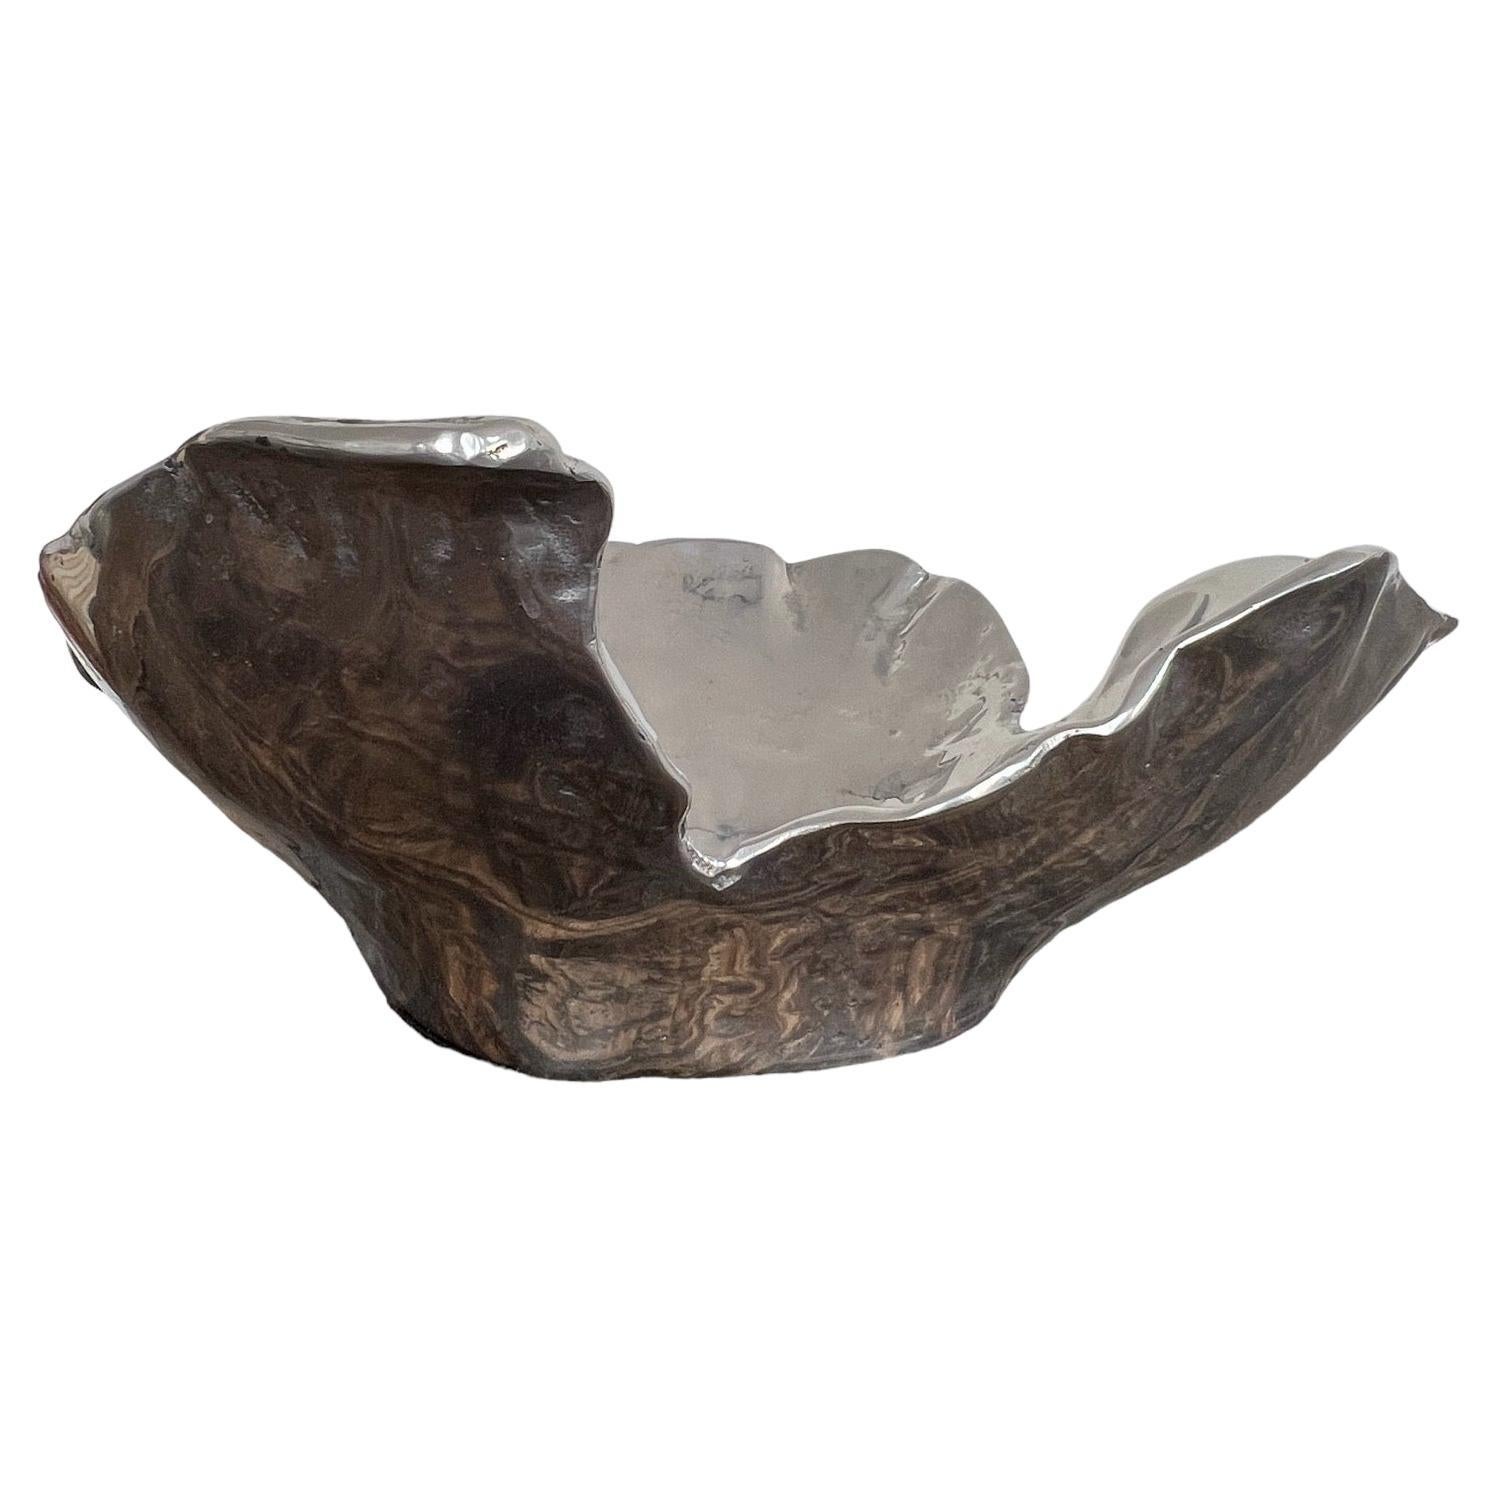 The decorative Large Medusa Bowl was created by David Marshall, it is made of sand cast aluminum.
Handmade, mounted and finished in our foundry and workshop in Spain from recycled materials.
Certified authentic by the Artist David Marshall with